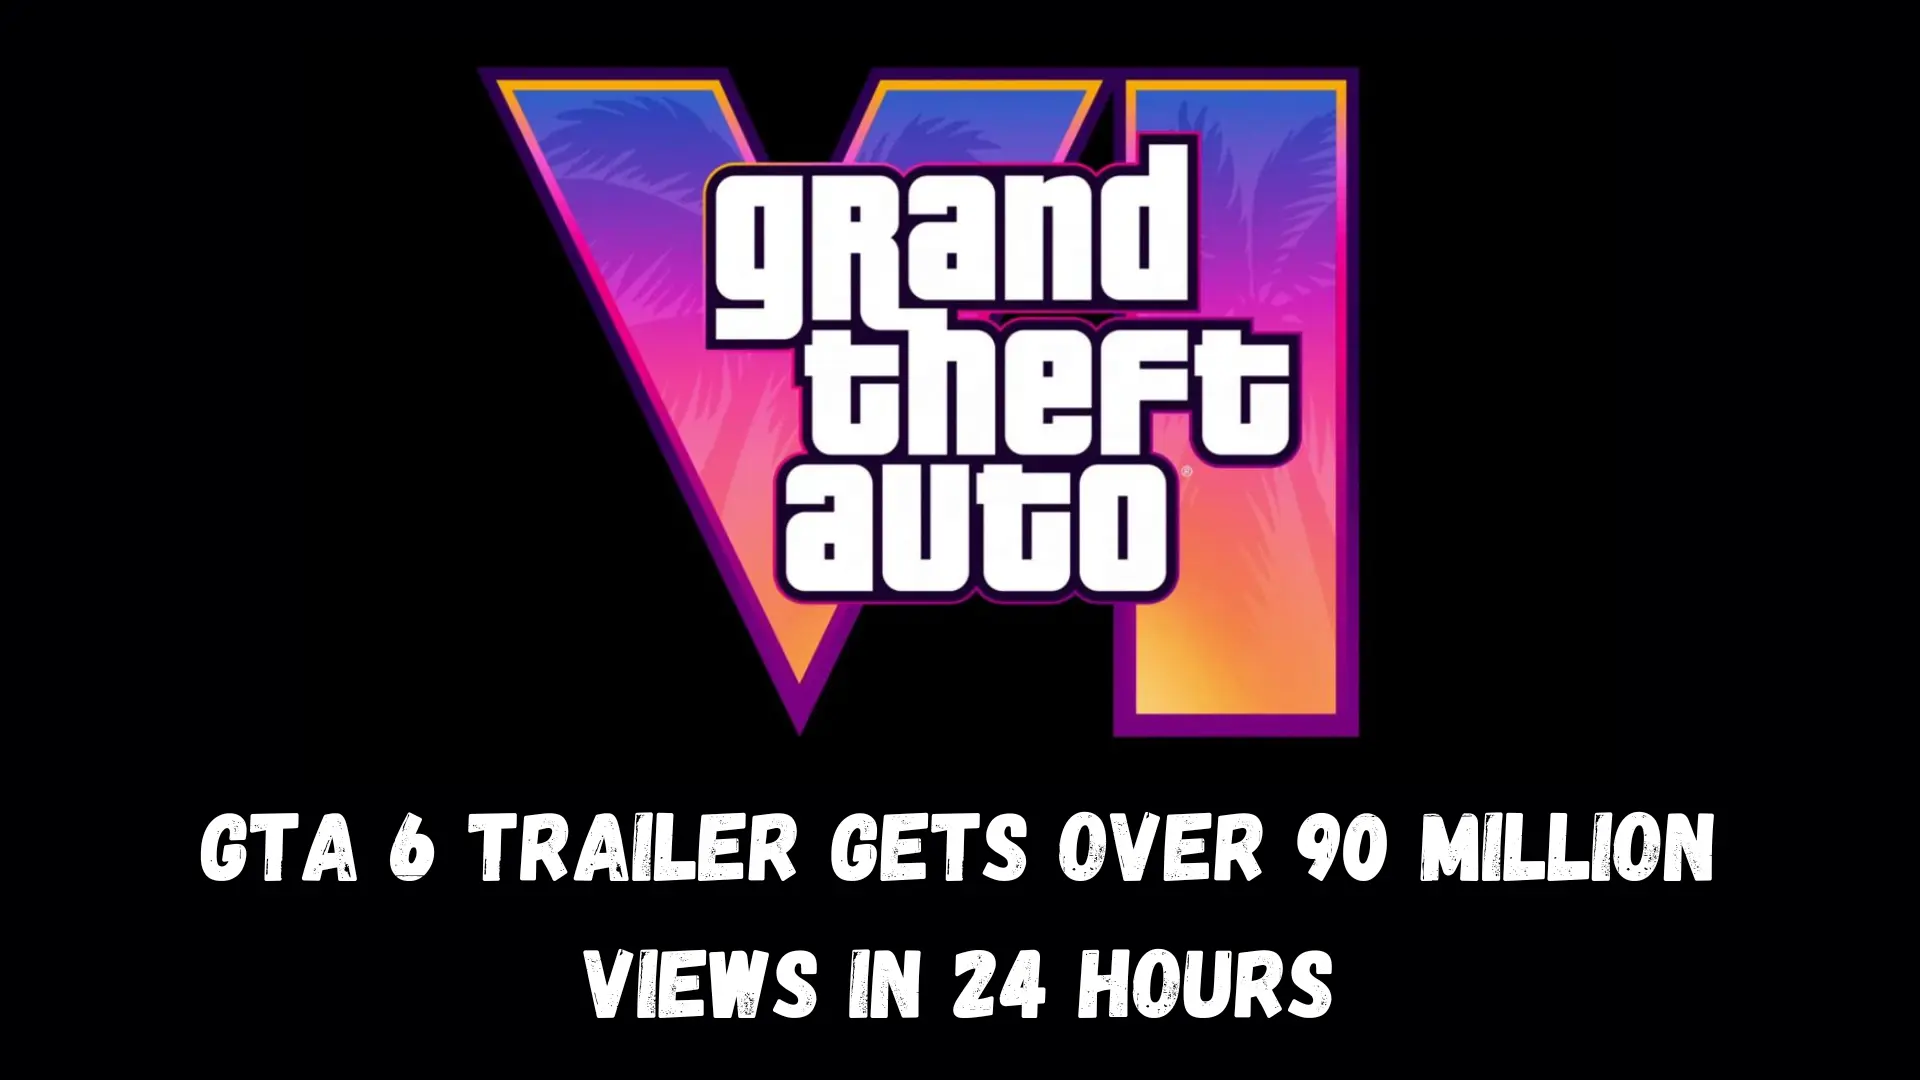 GTA 6 Trailer Gets Over 90 Million Views in 24 Hours